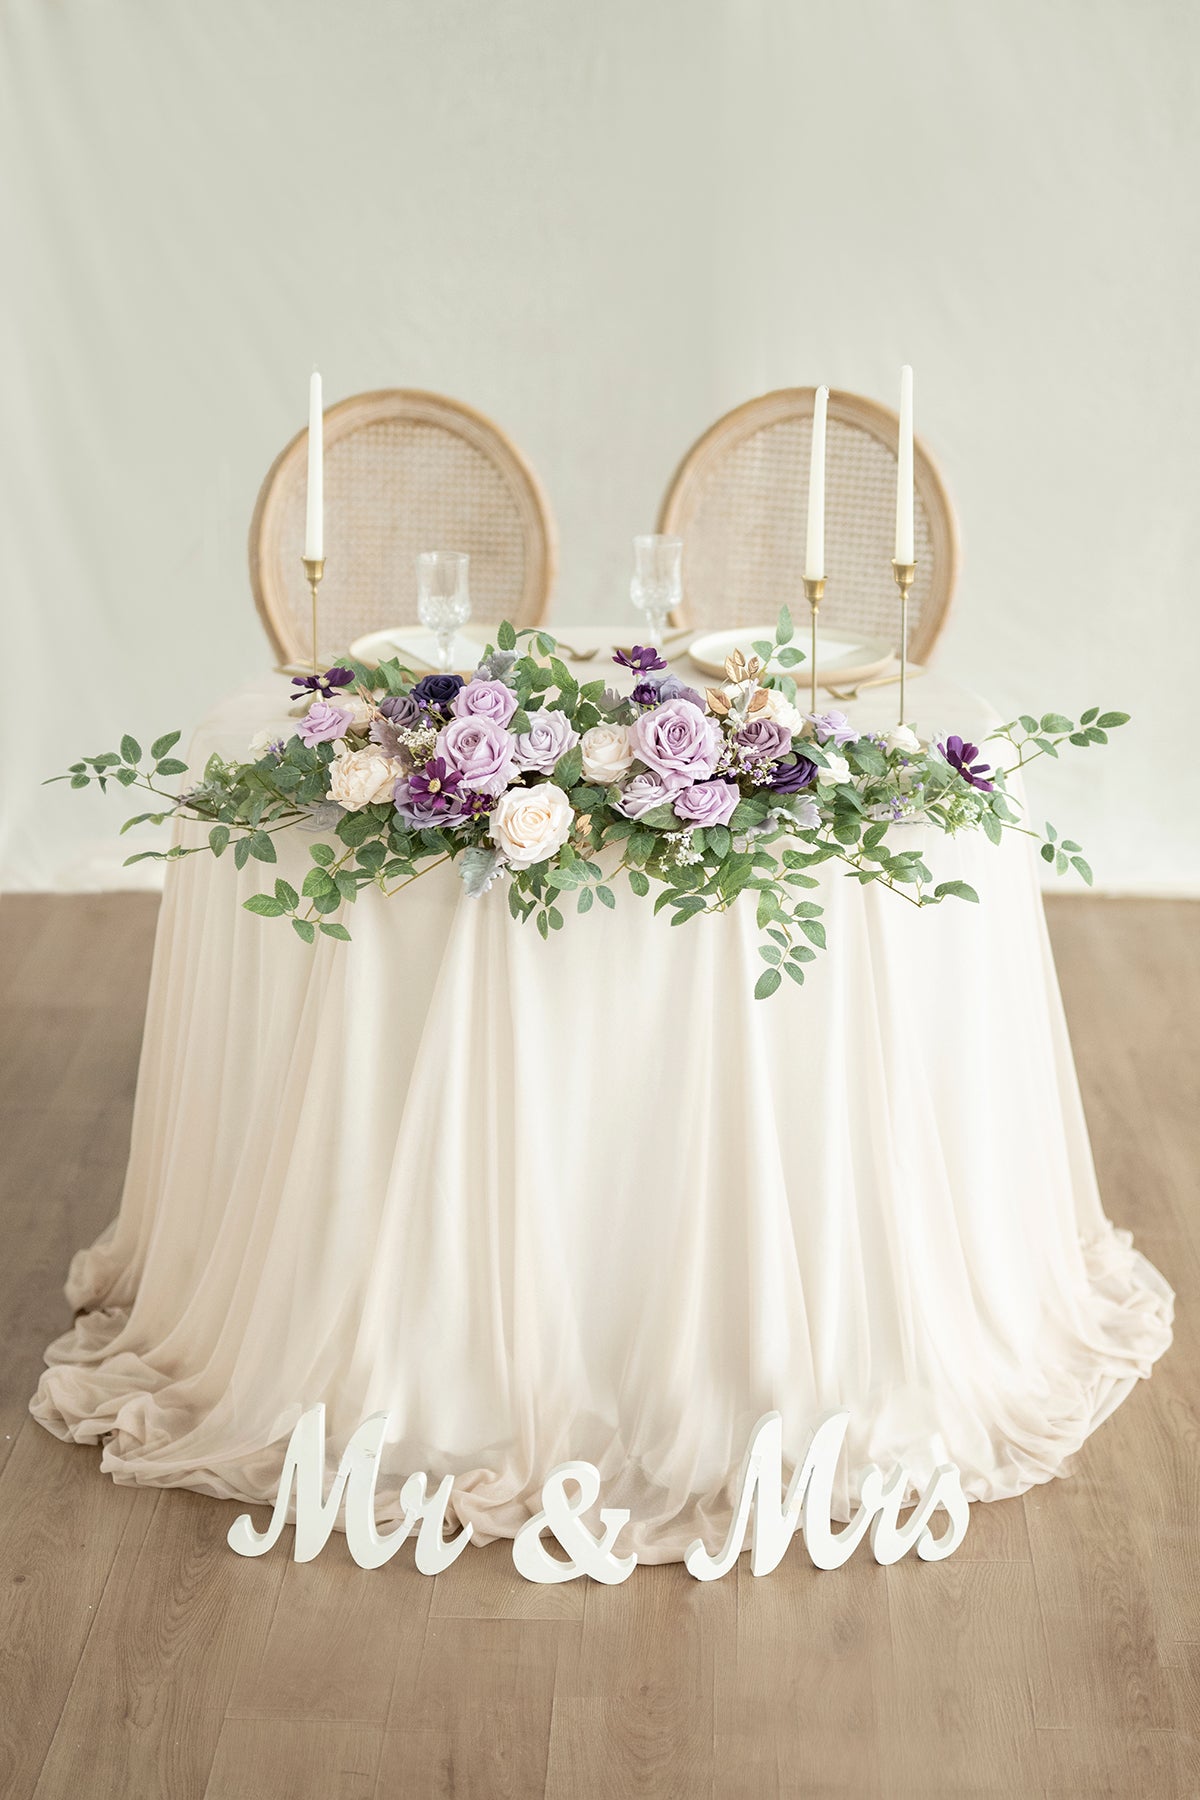 Head Table Floral Swags in Lilac & Gold | Limit-time